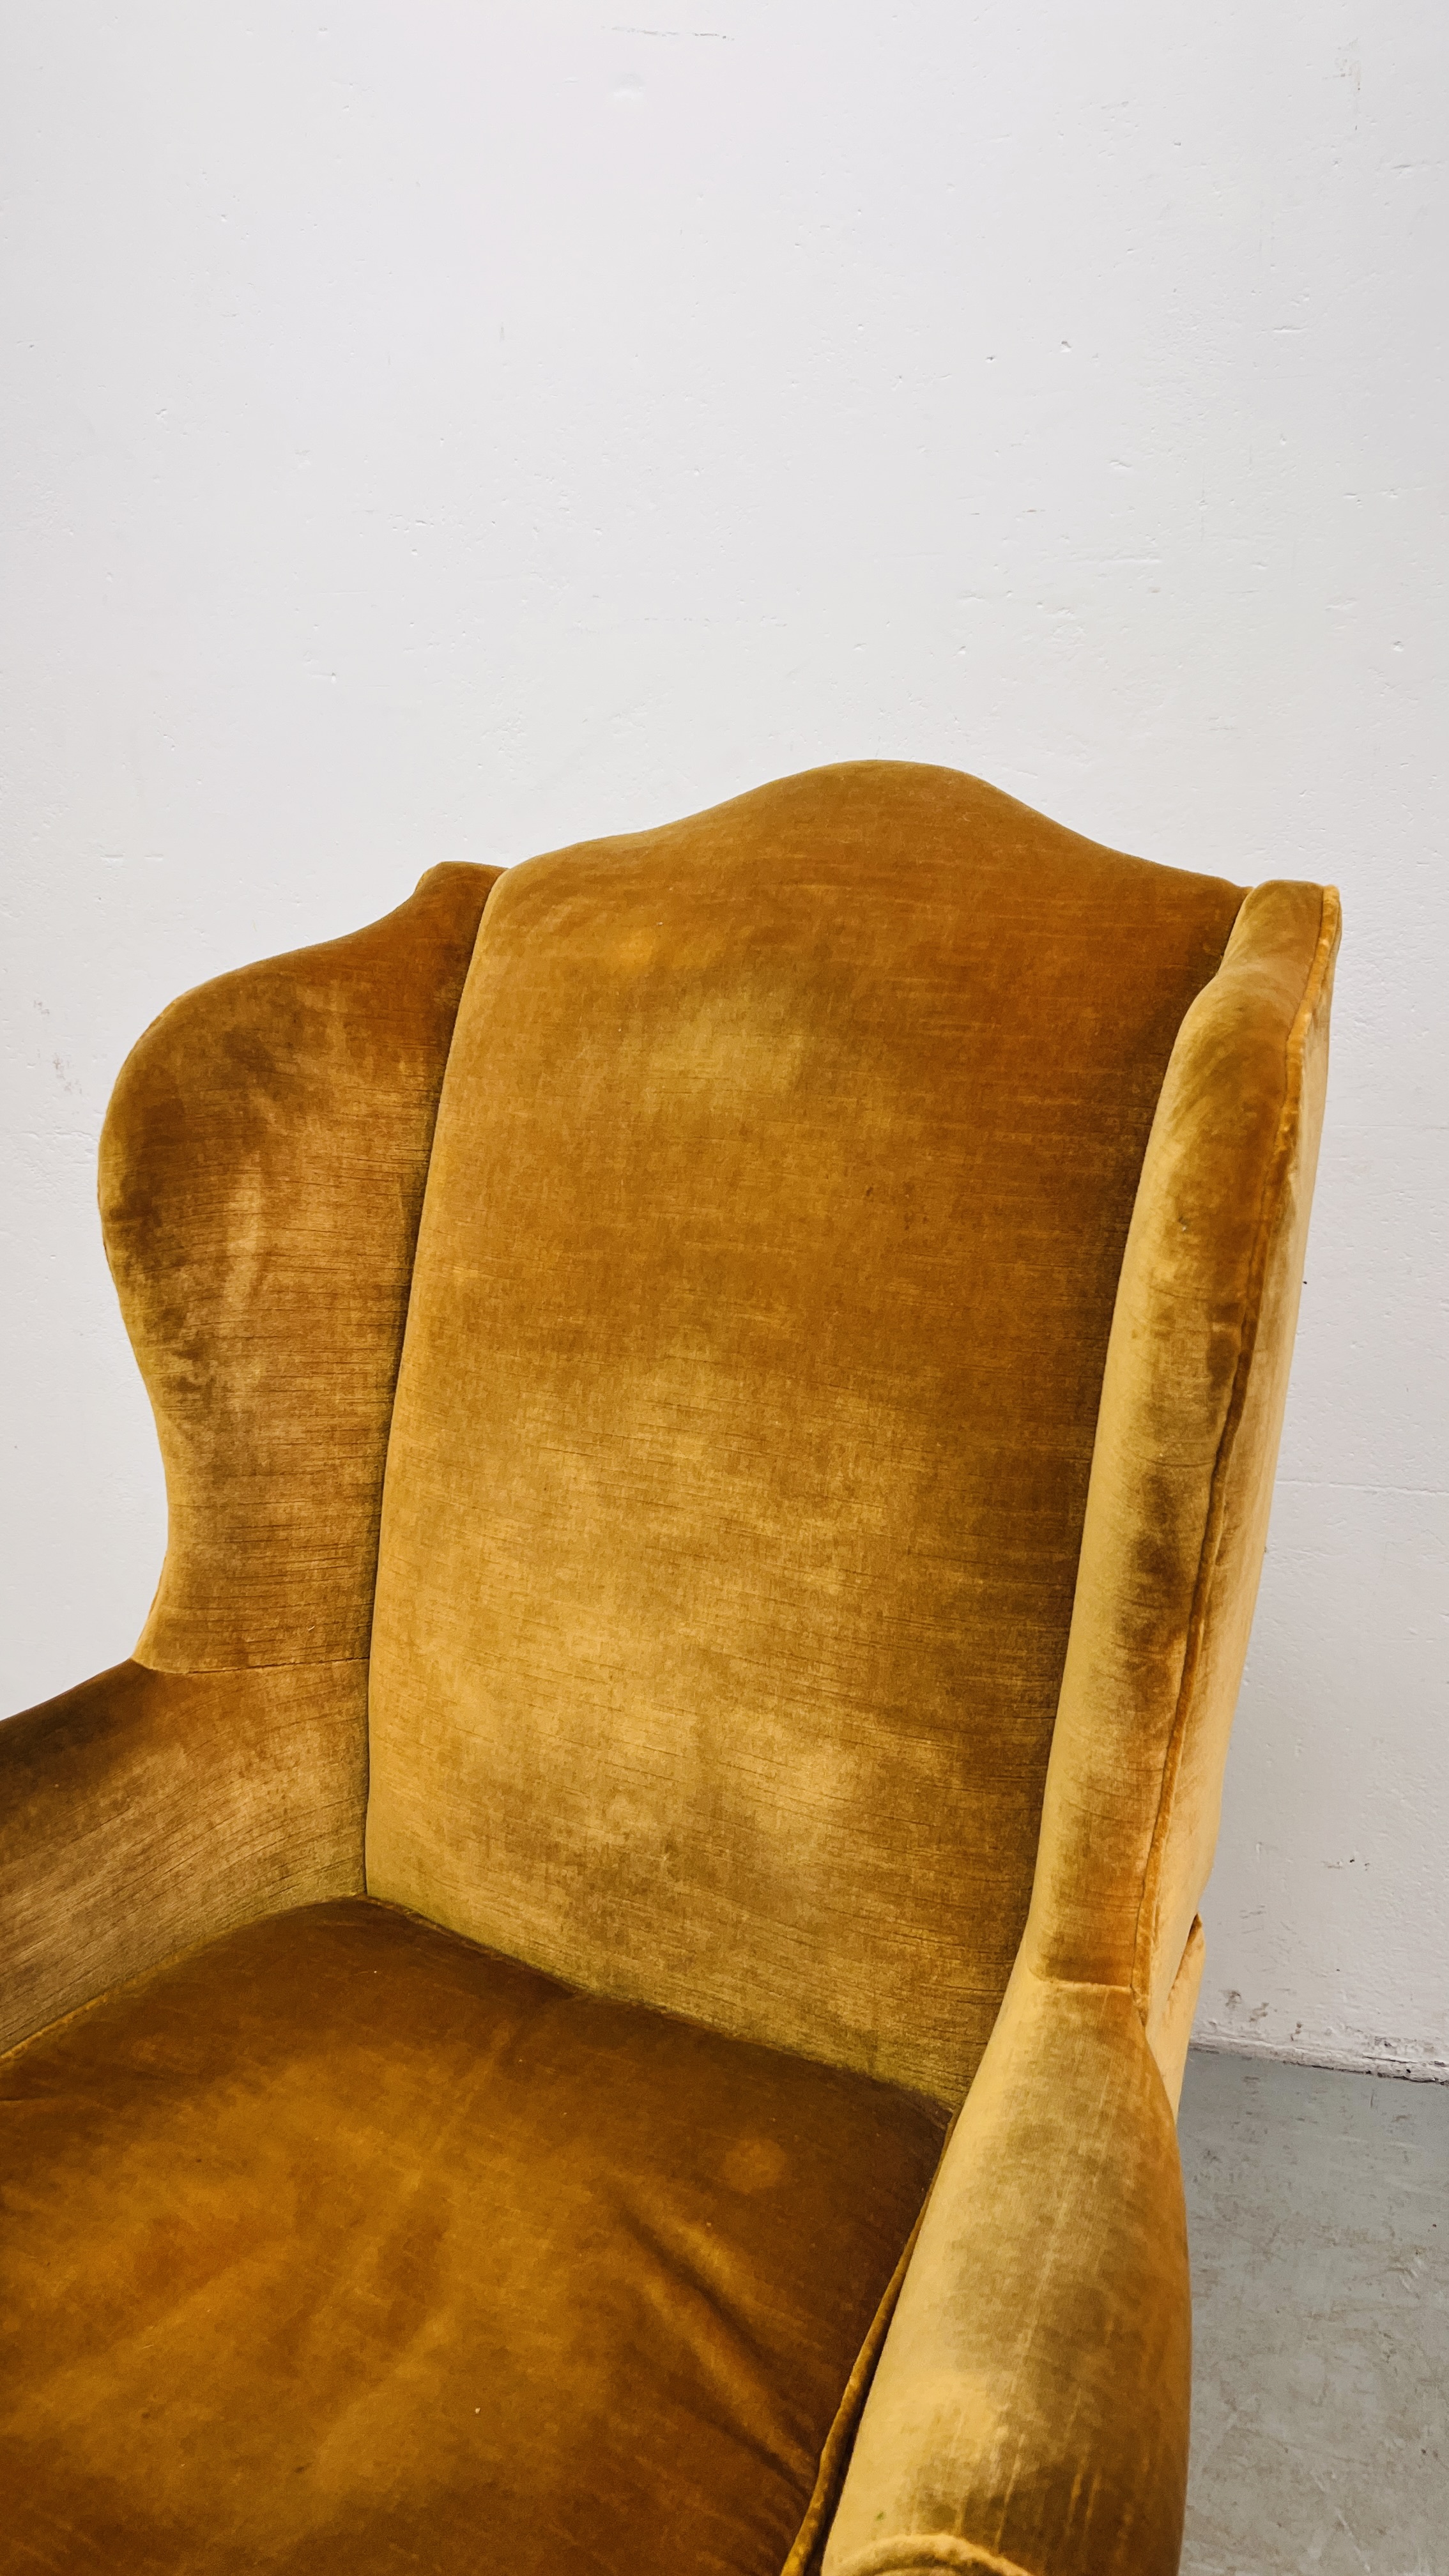 A MAHOGANY WINGED ARMCHAIR (COVER STAINED) - Image 2 of 7